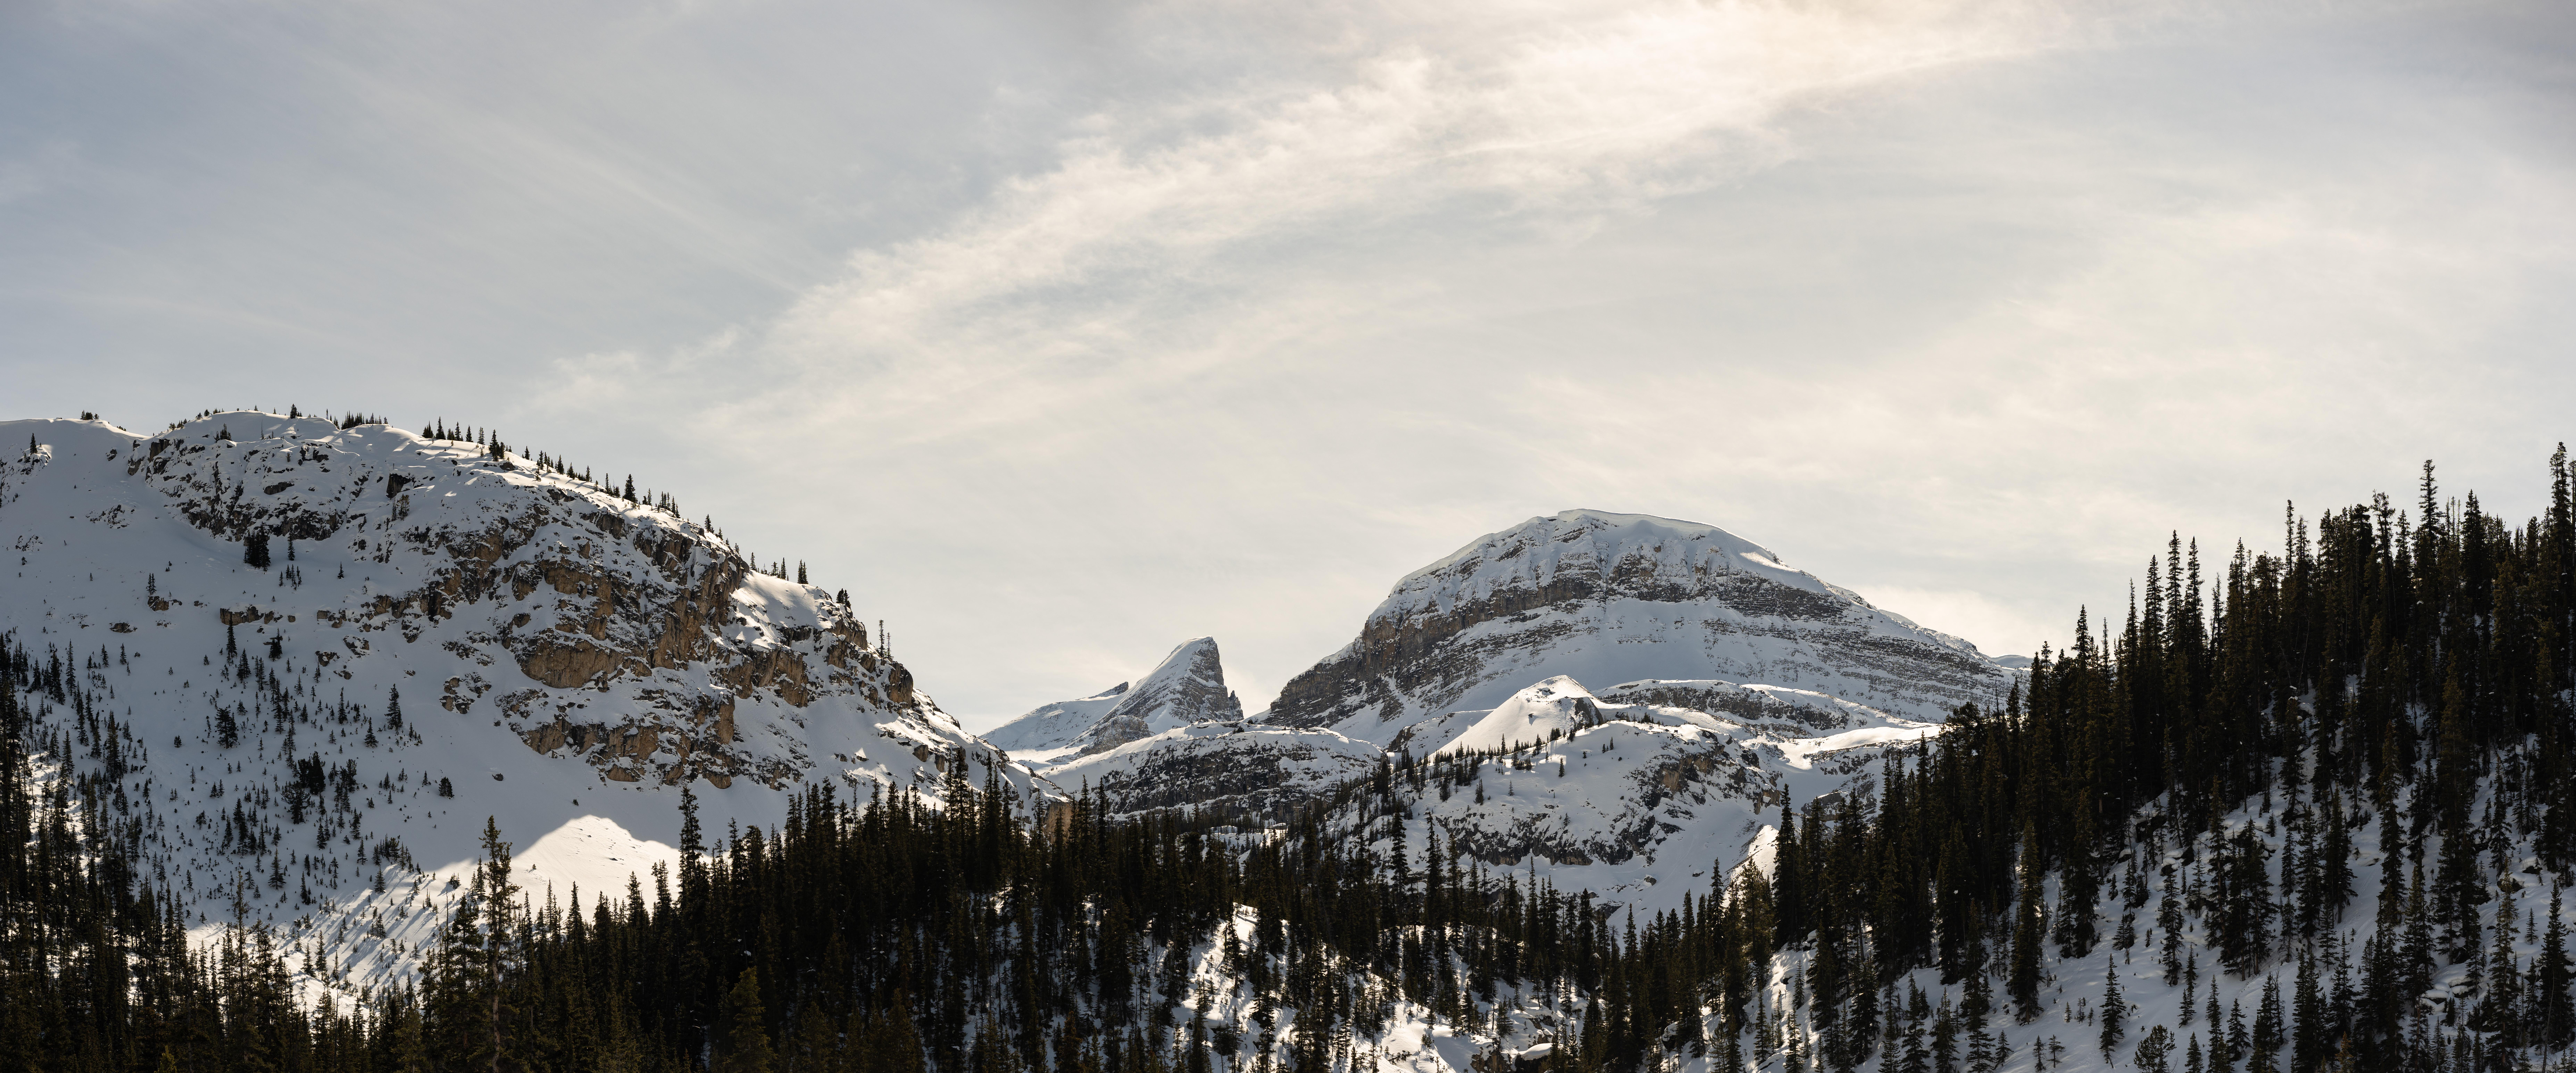 General 14837x6182 Canada Alberta Banff landscape forest snow winter mountains panorama cliff cirrus clouds nature clouds sky trees